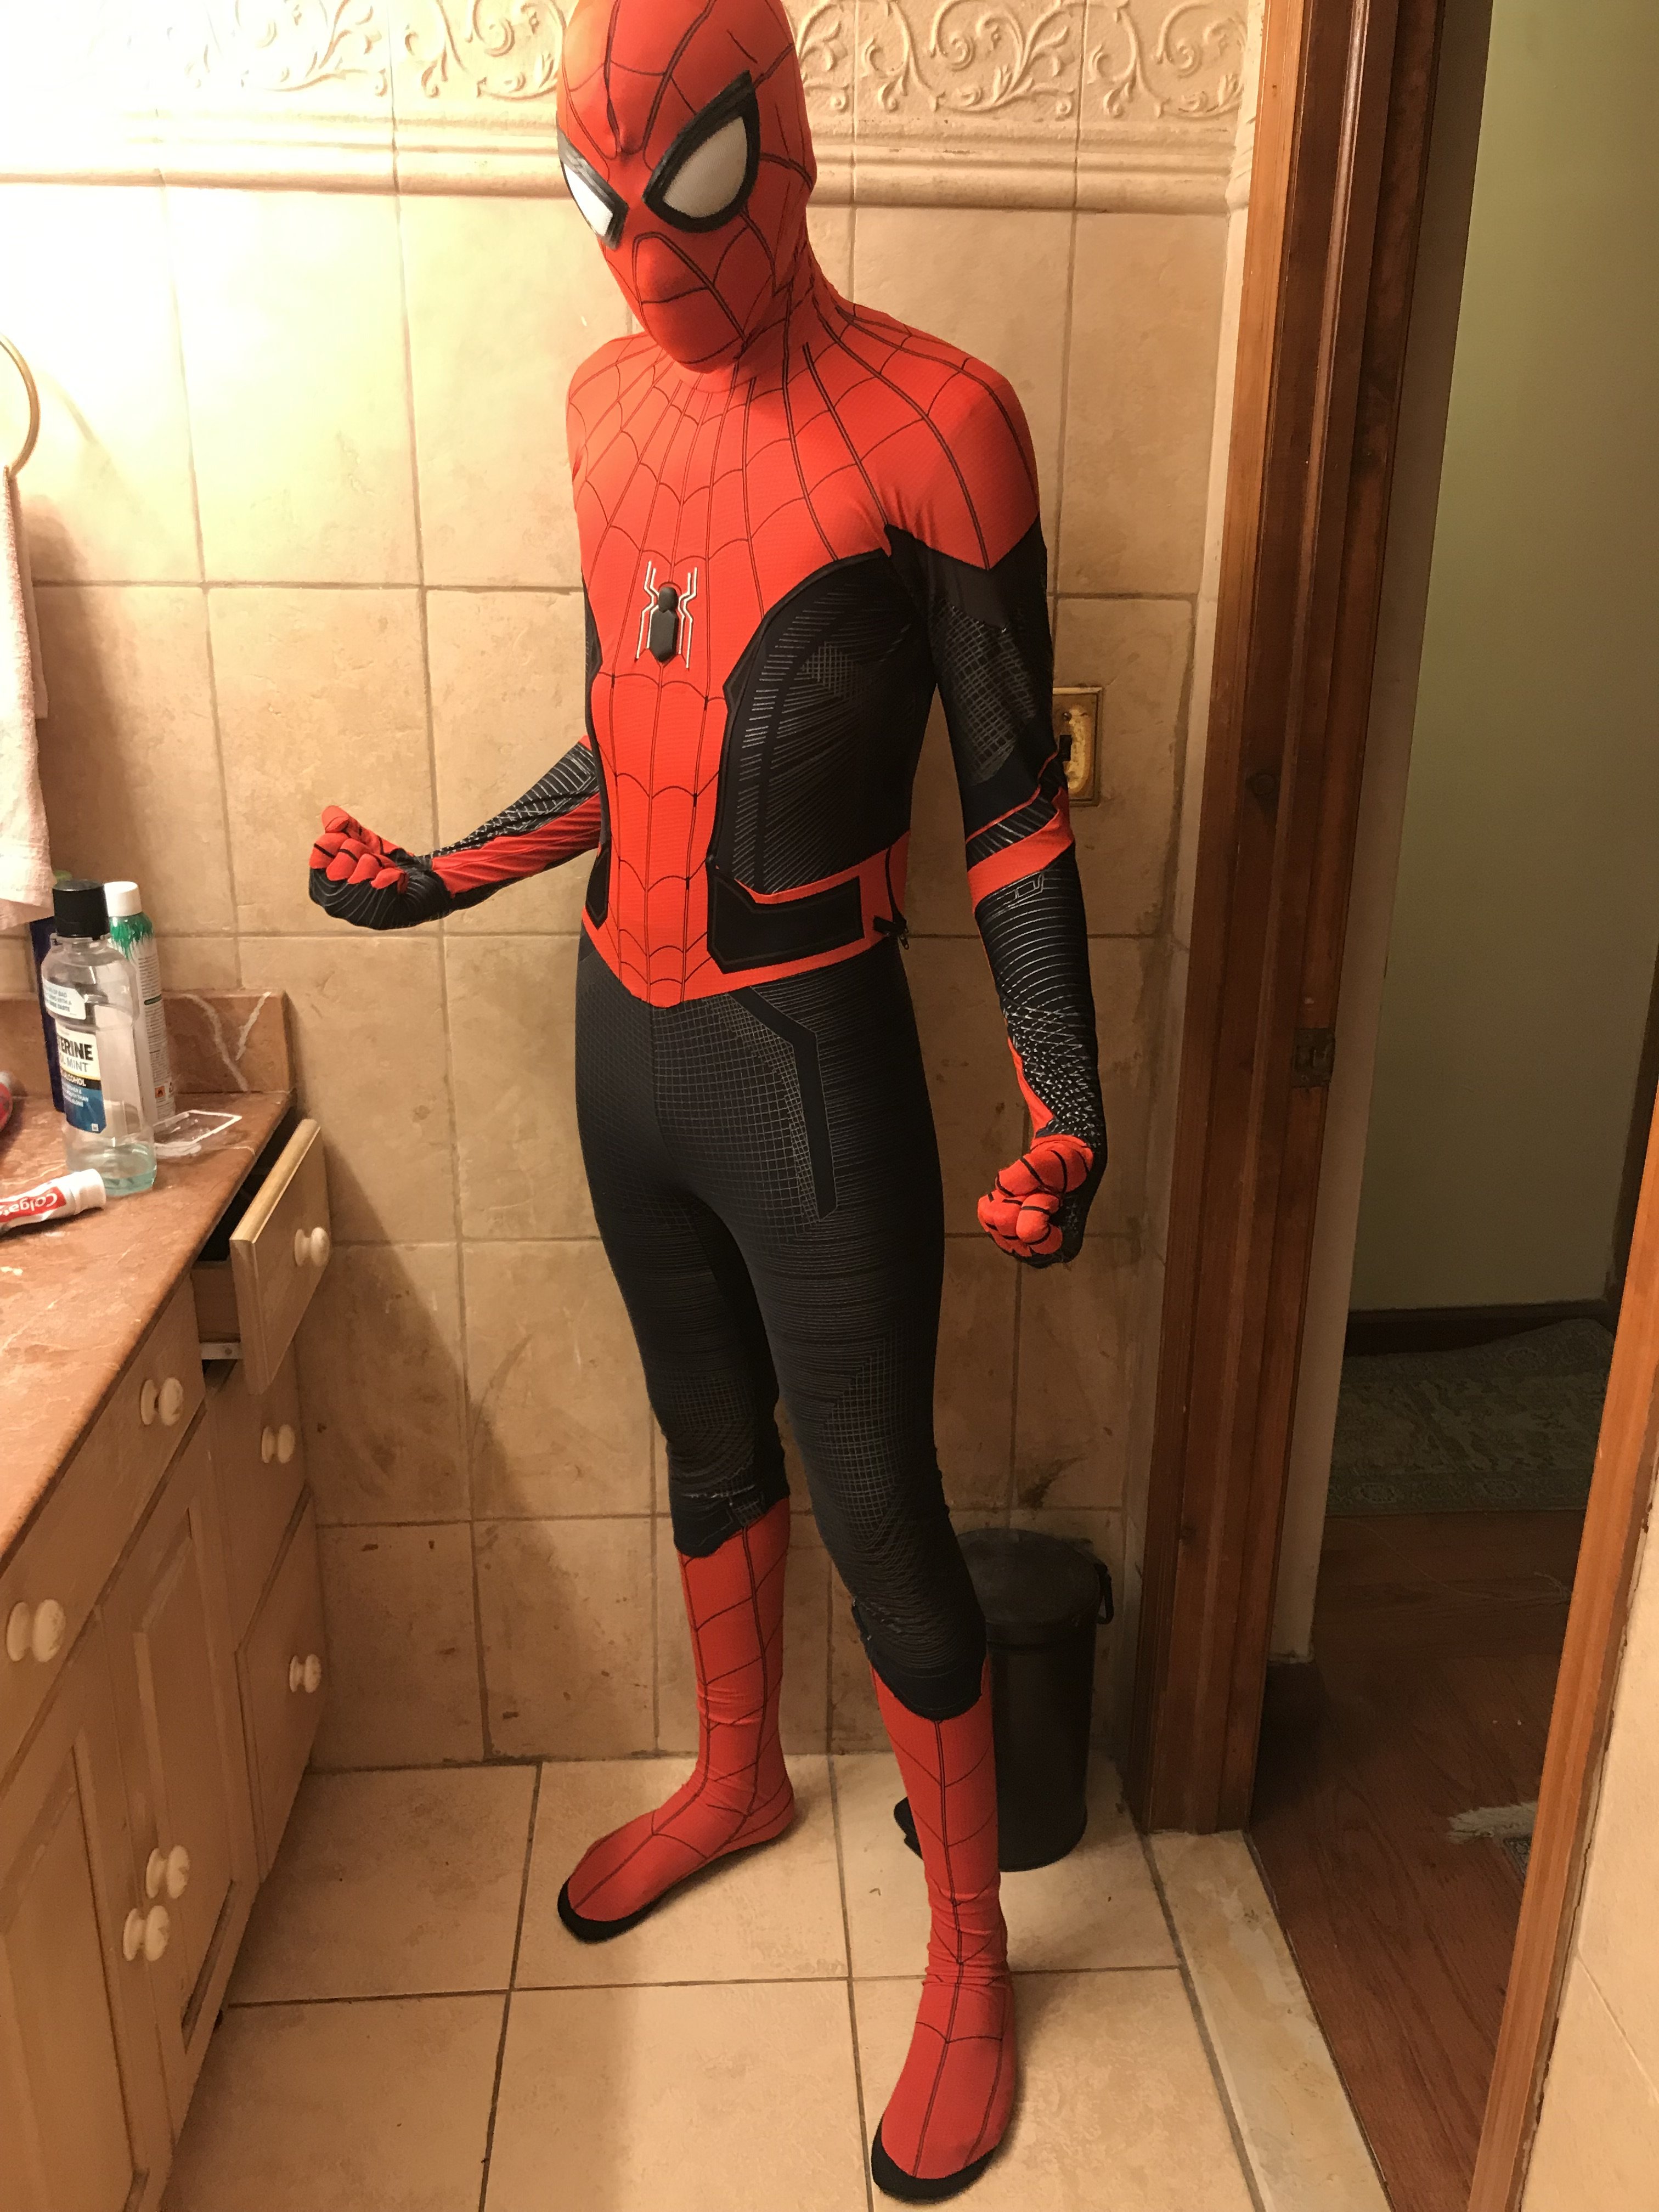 Spider-Man: Far From Home - Parker suit replica [Sony promotional